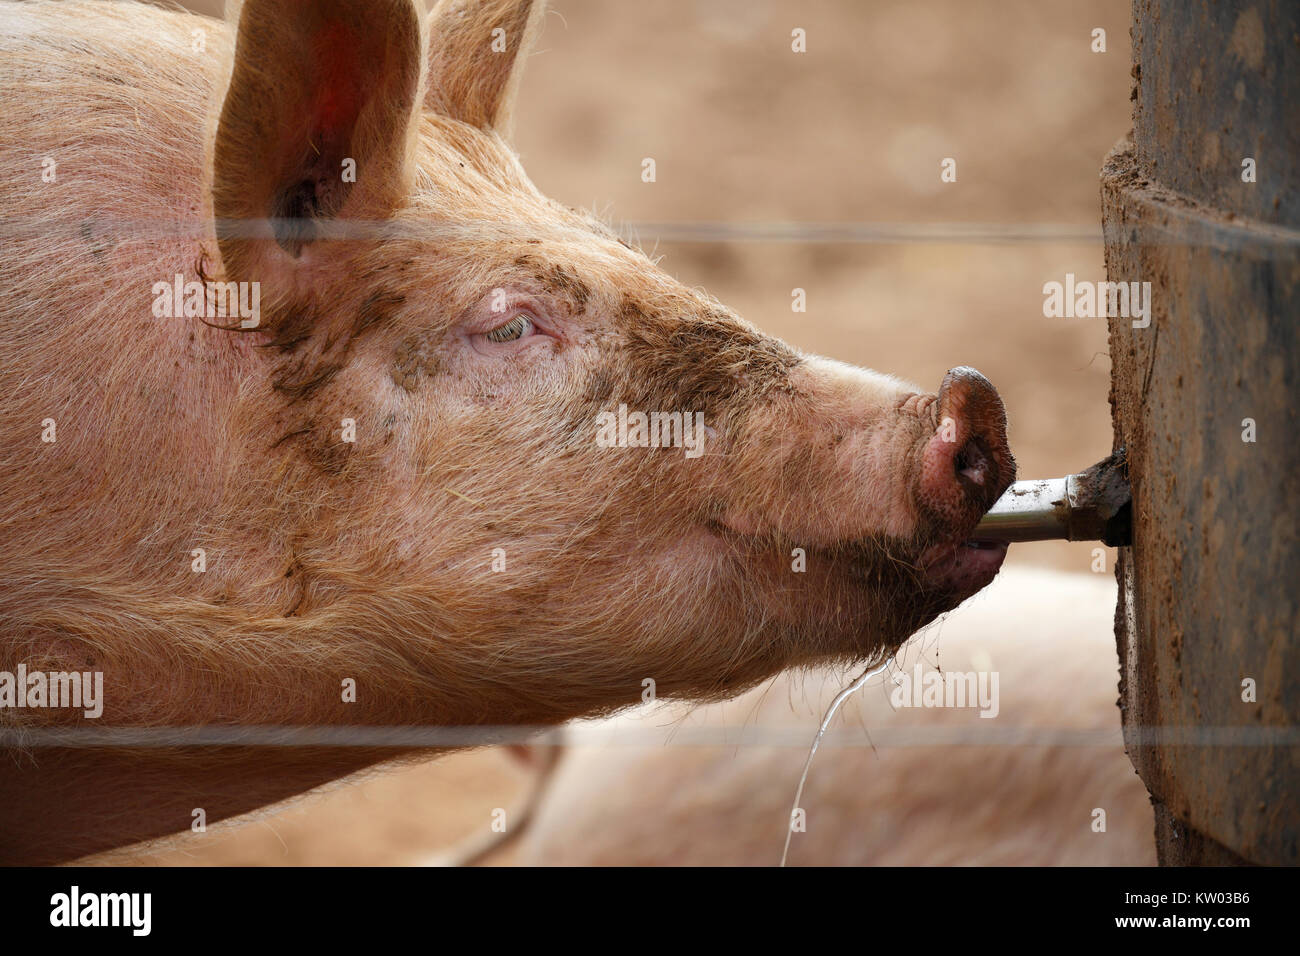 Profile of a pig drinking water. Stock Photo